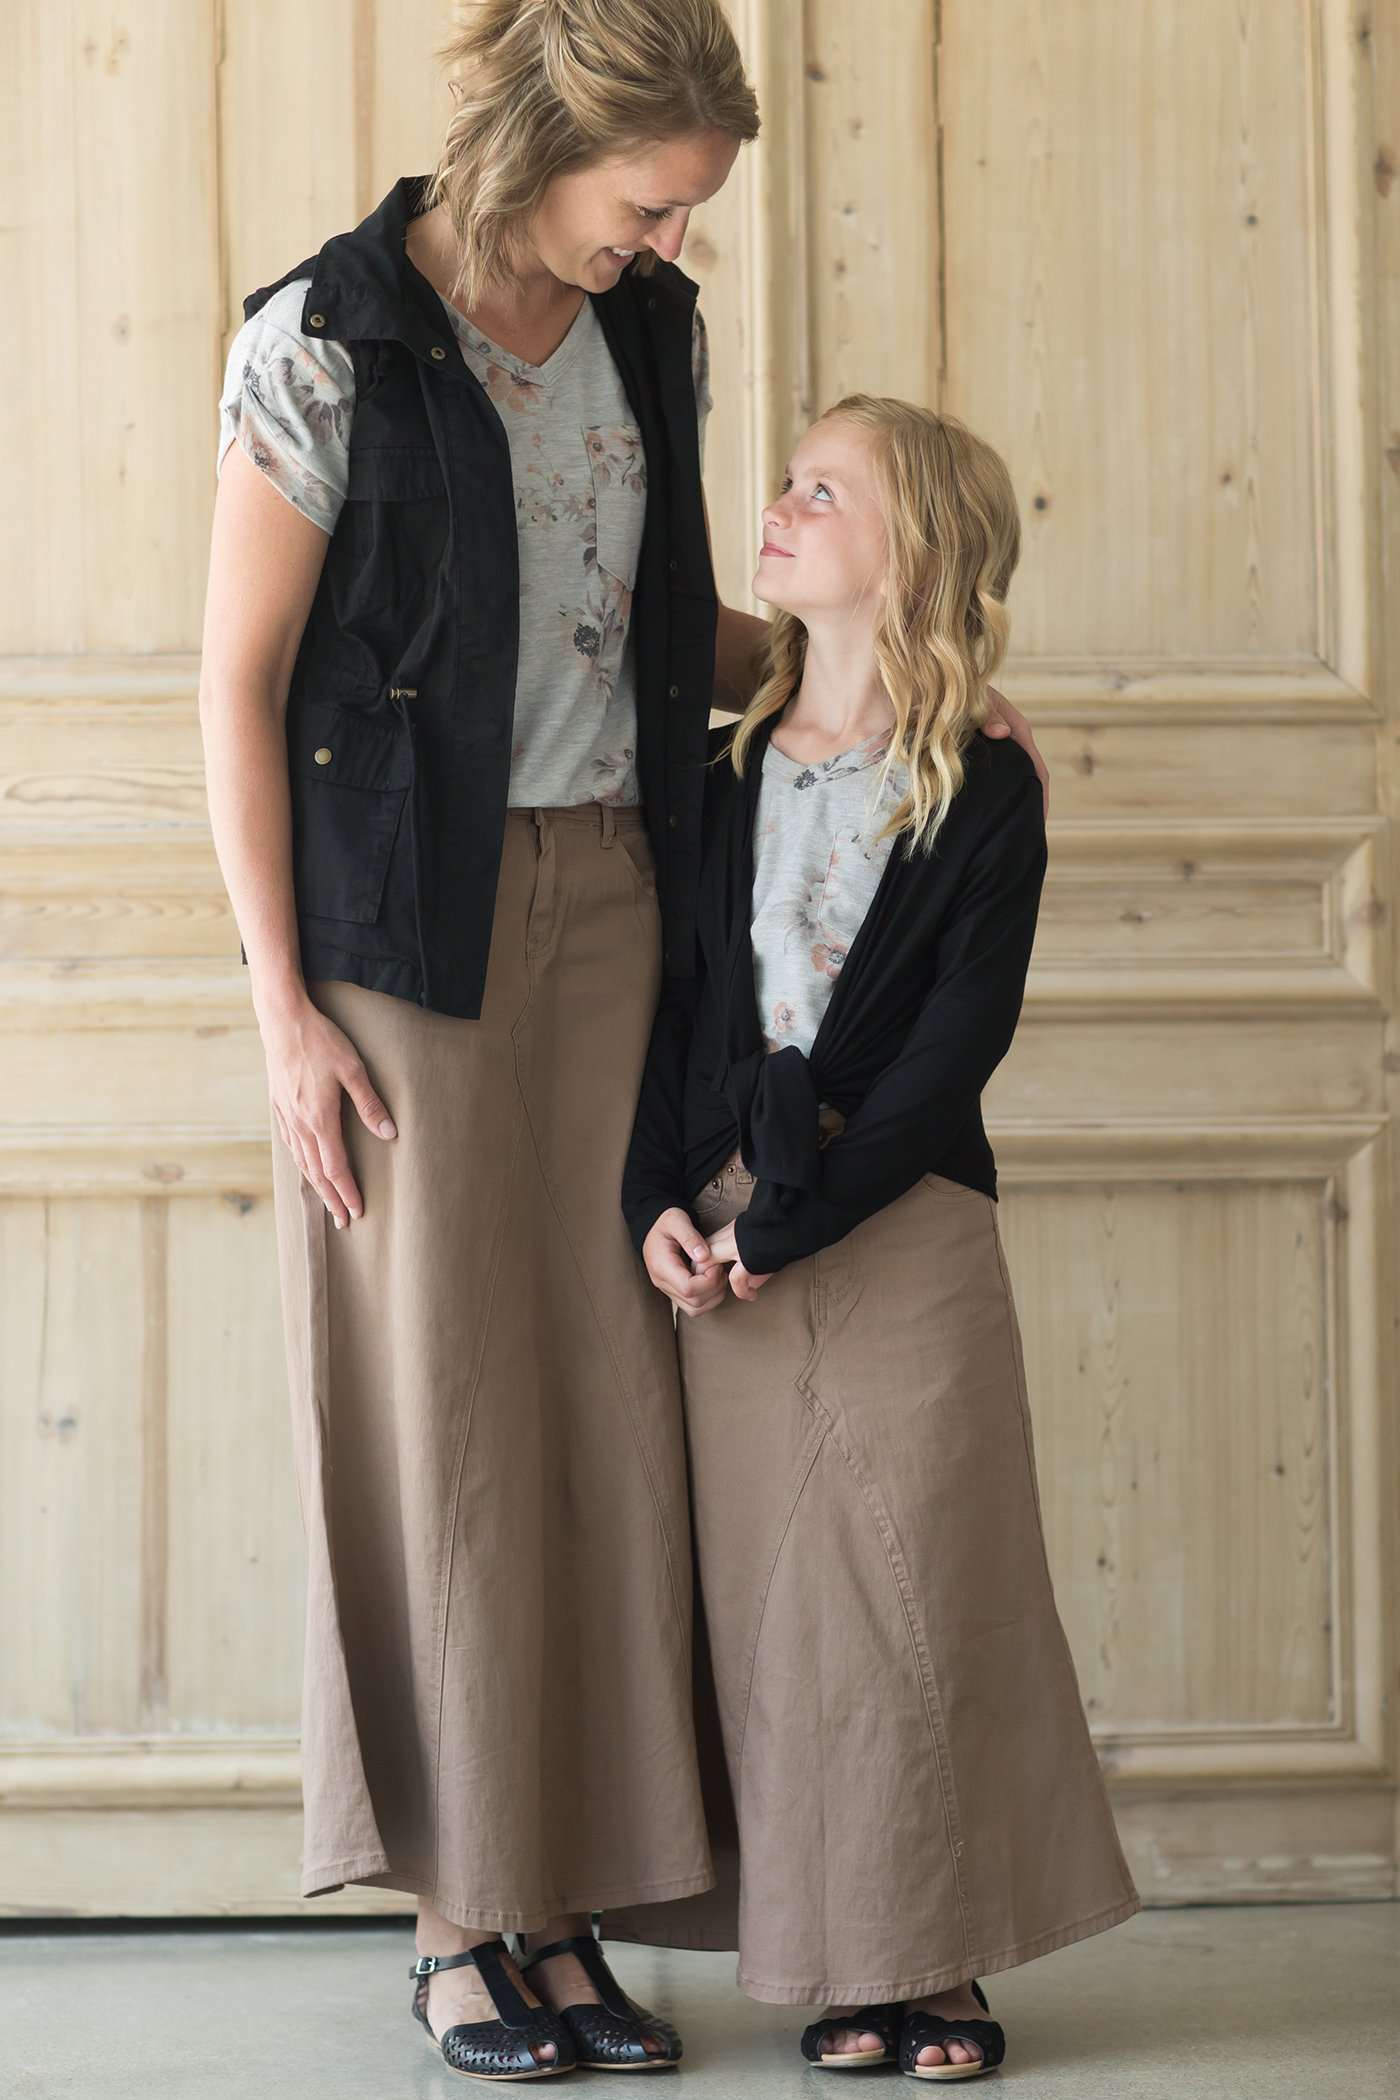 Shop this long, modest khaki twill skirt with a beautiful a-line insert.